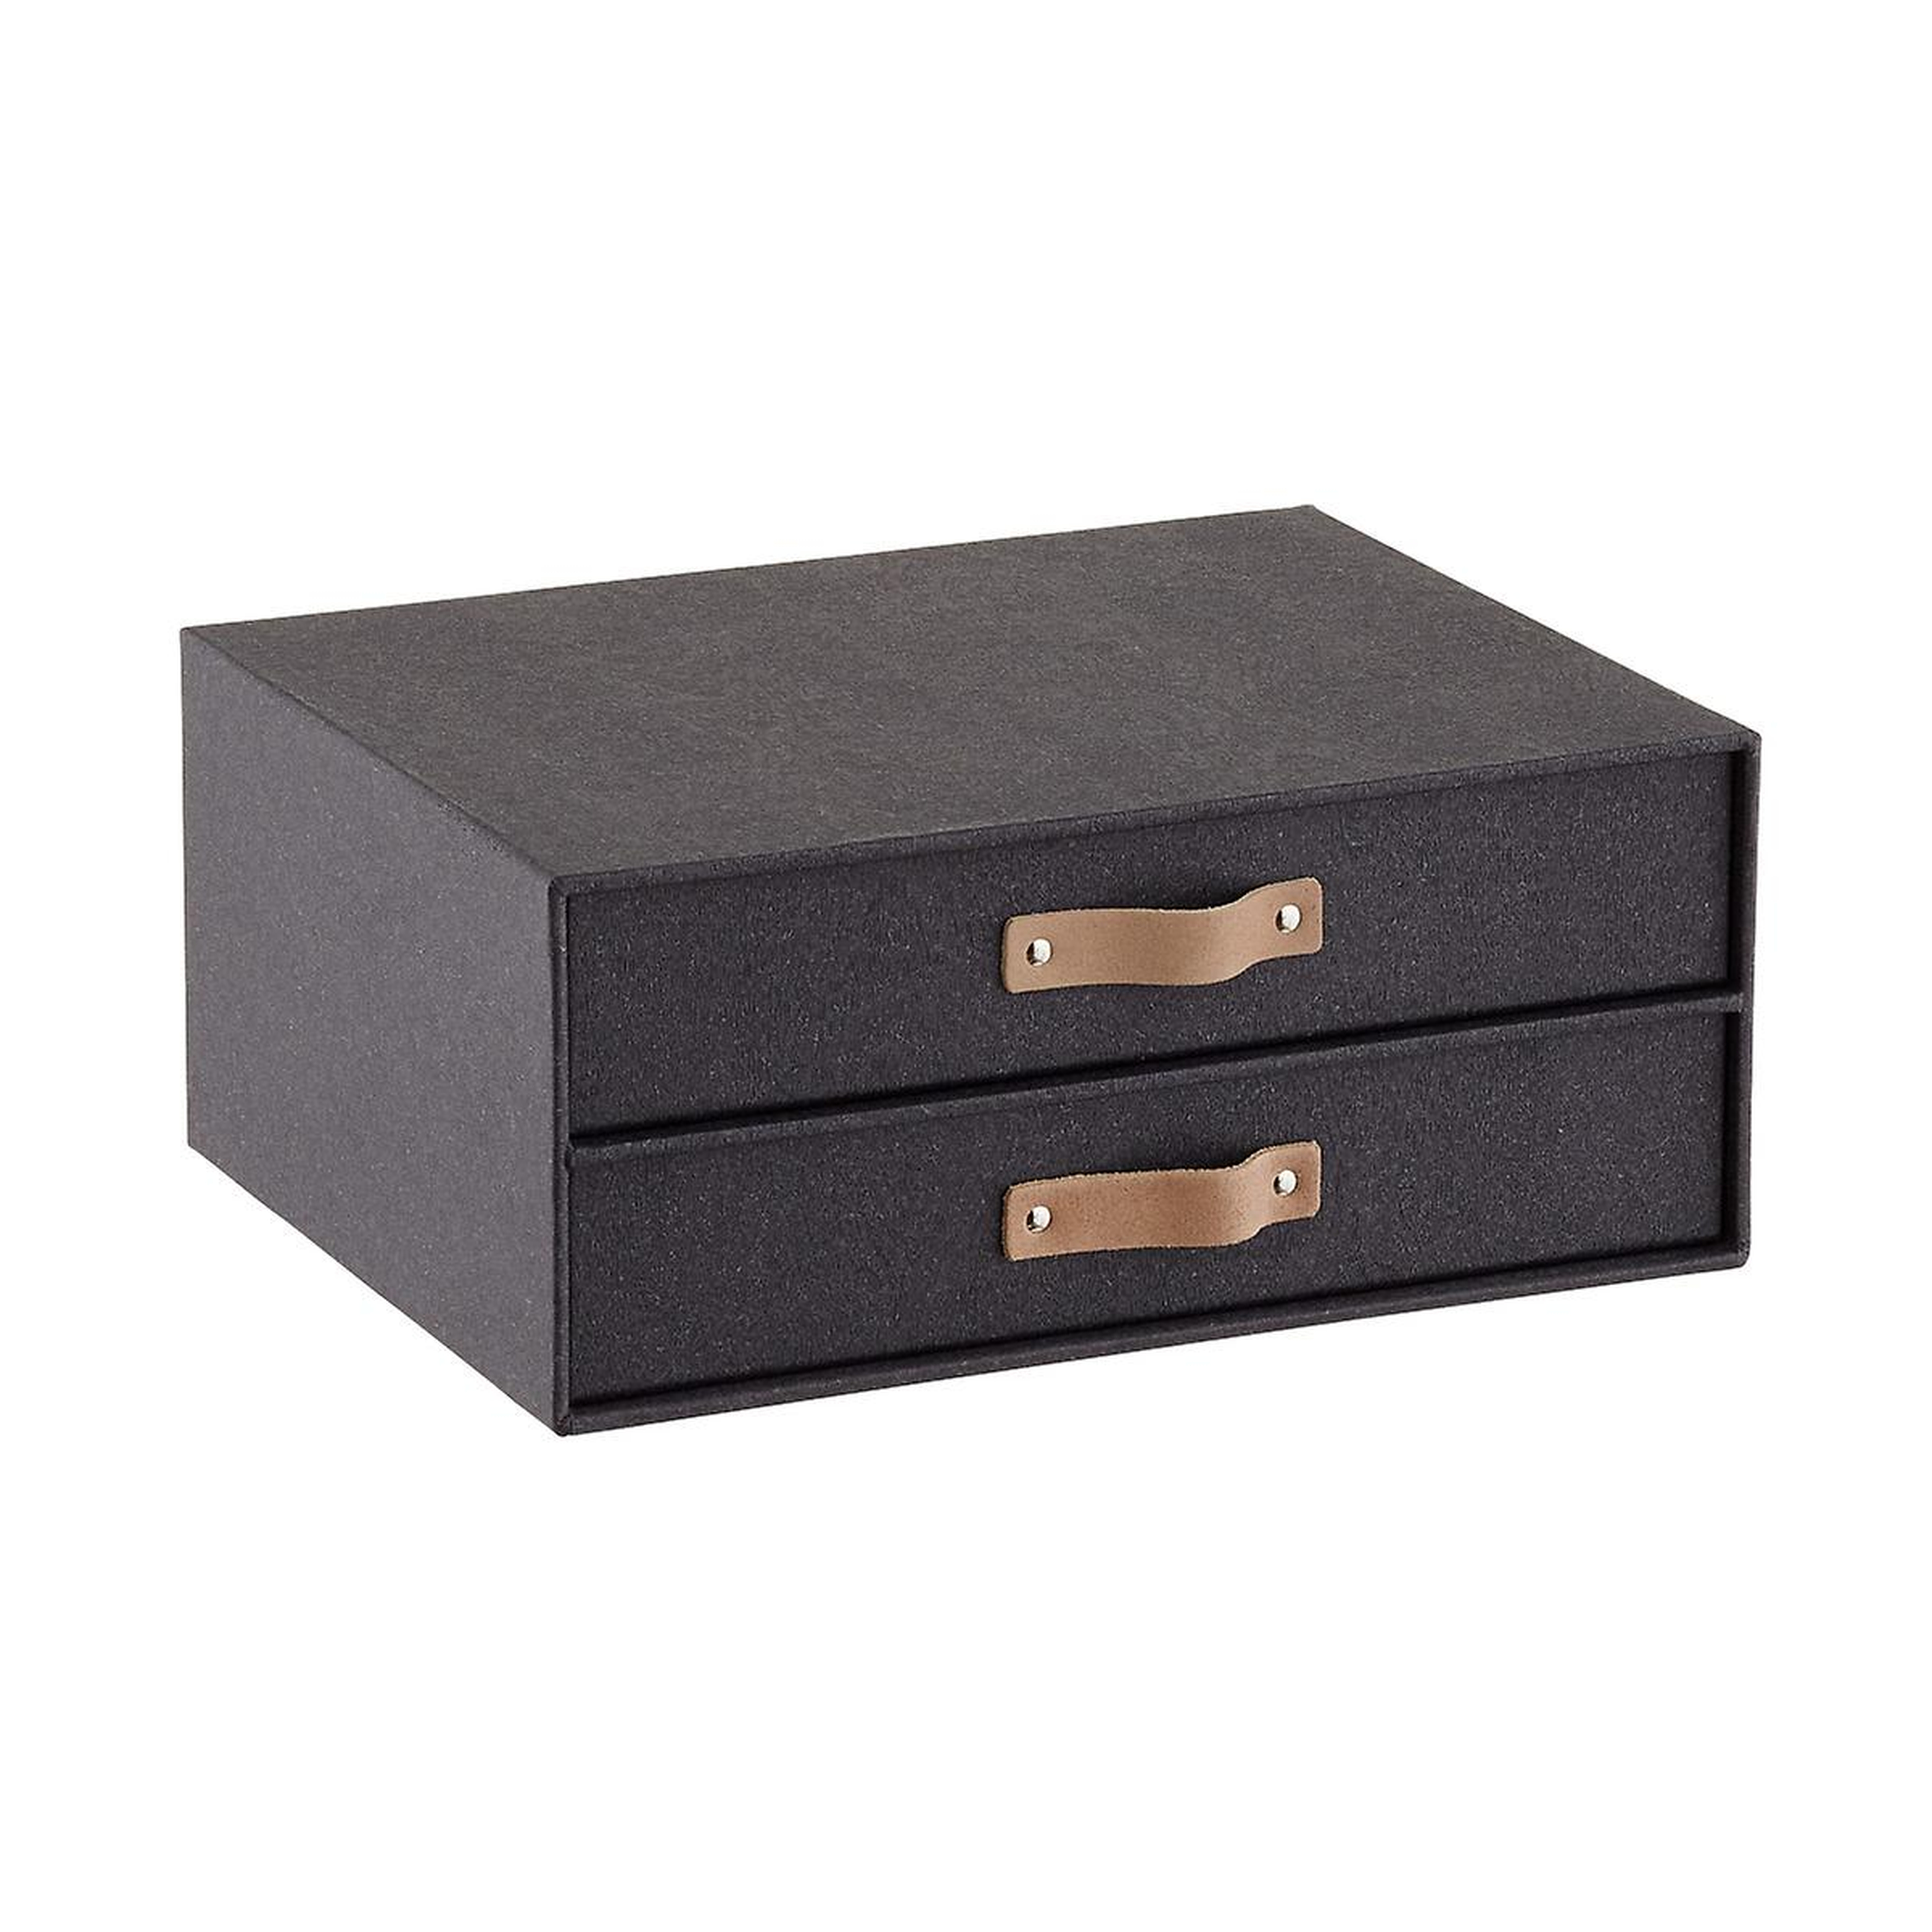 Bigso Black Woodgrain Paper Drawers - containerstore.com